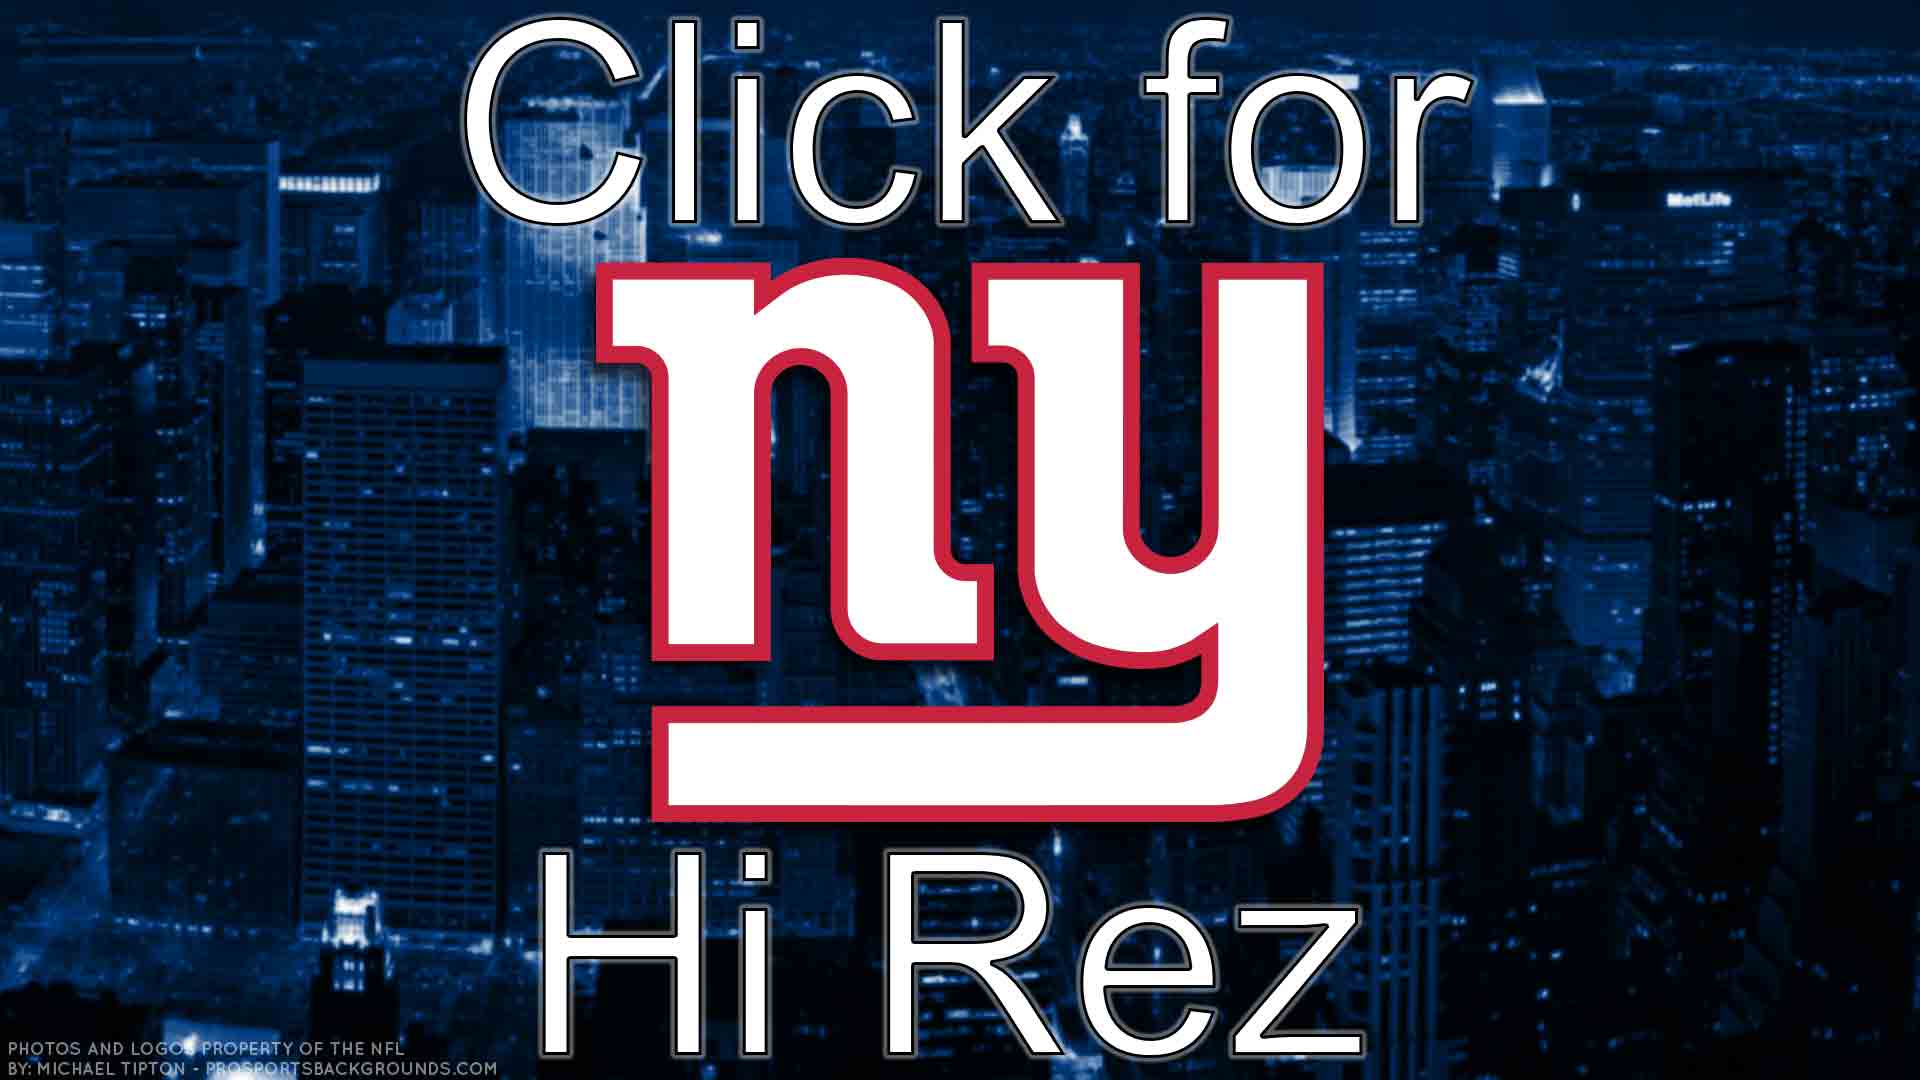 New York Giants Wallpaper. iPhone. Android